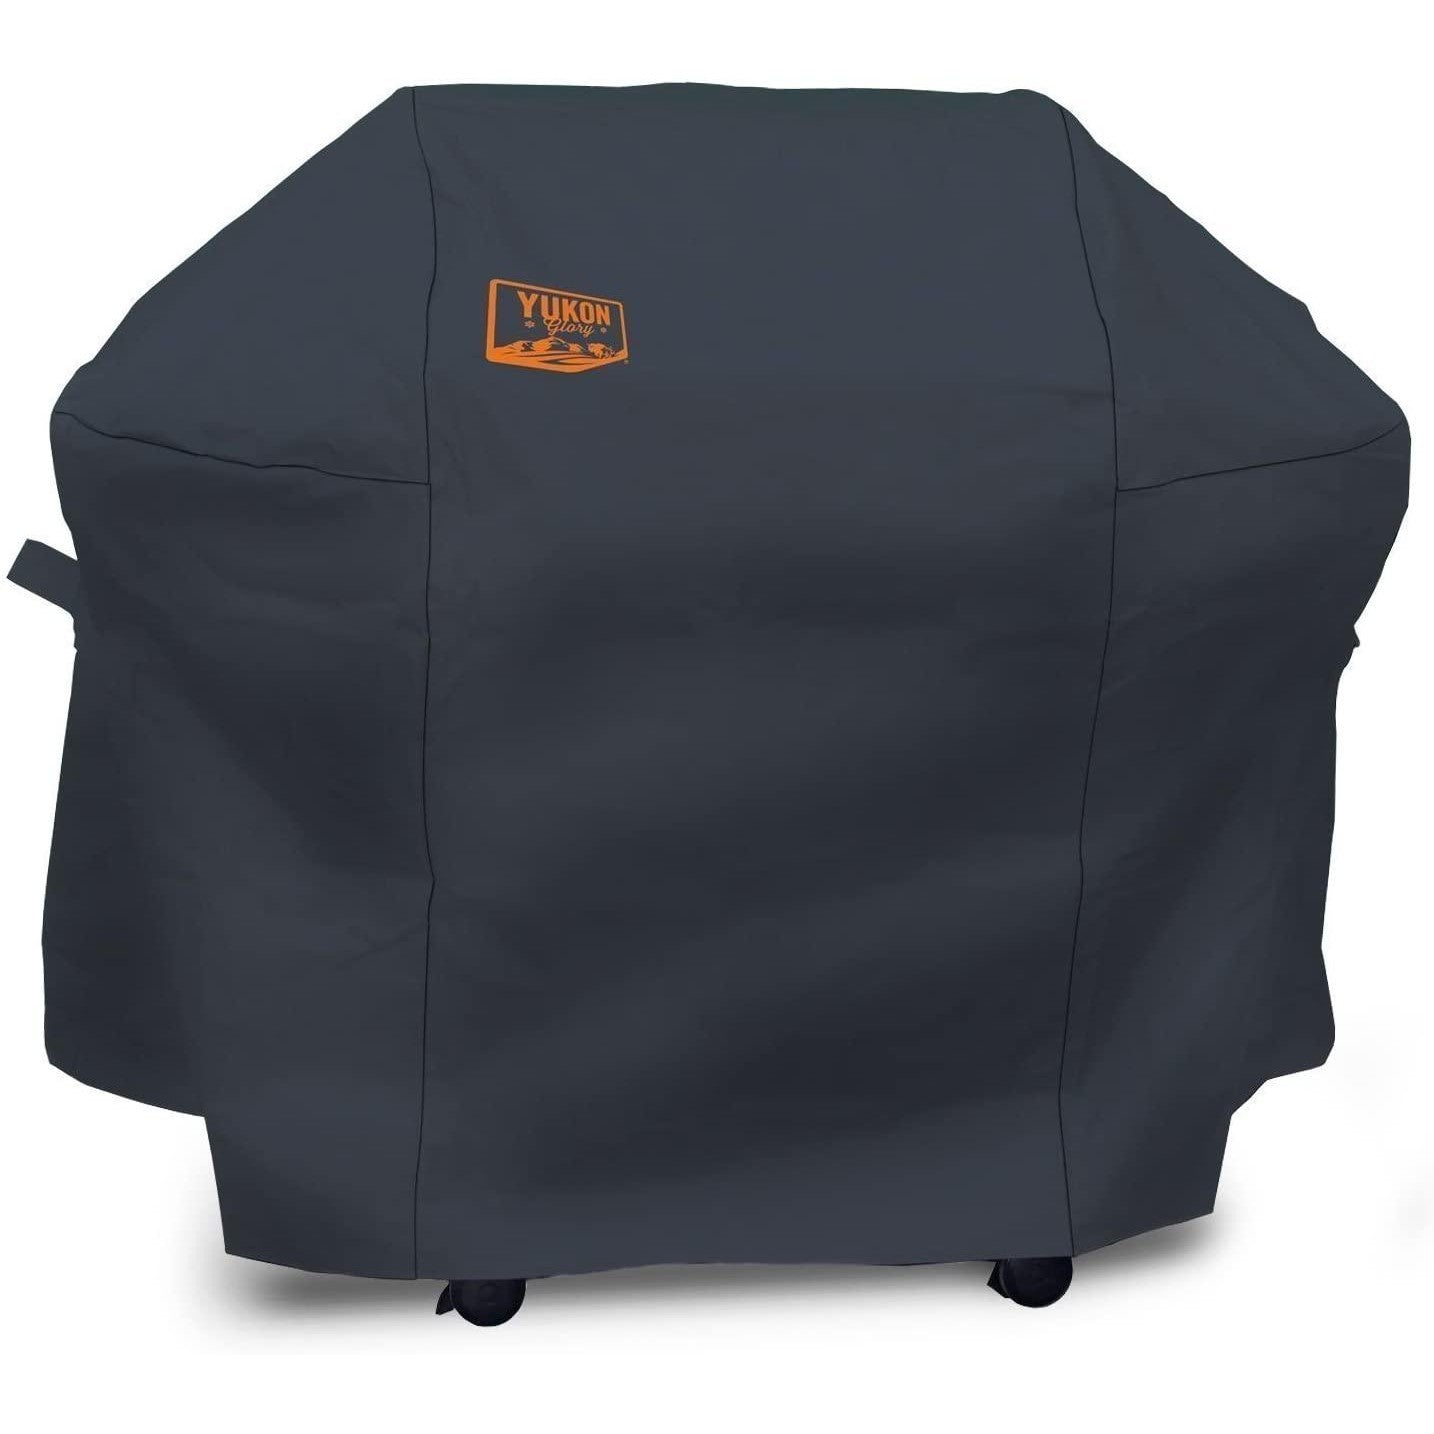 Weber Spirit 220 and 300 Series Gas Grill Cover Home & Garden from yukonglory